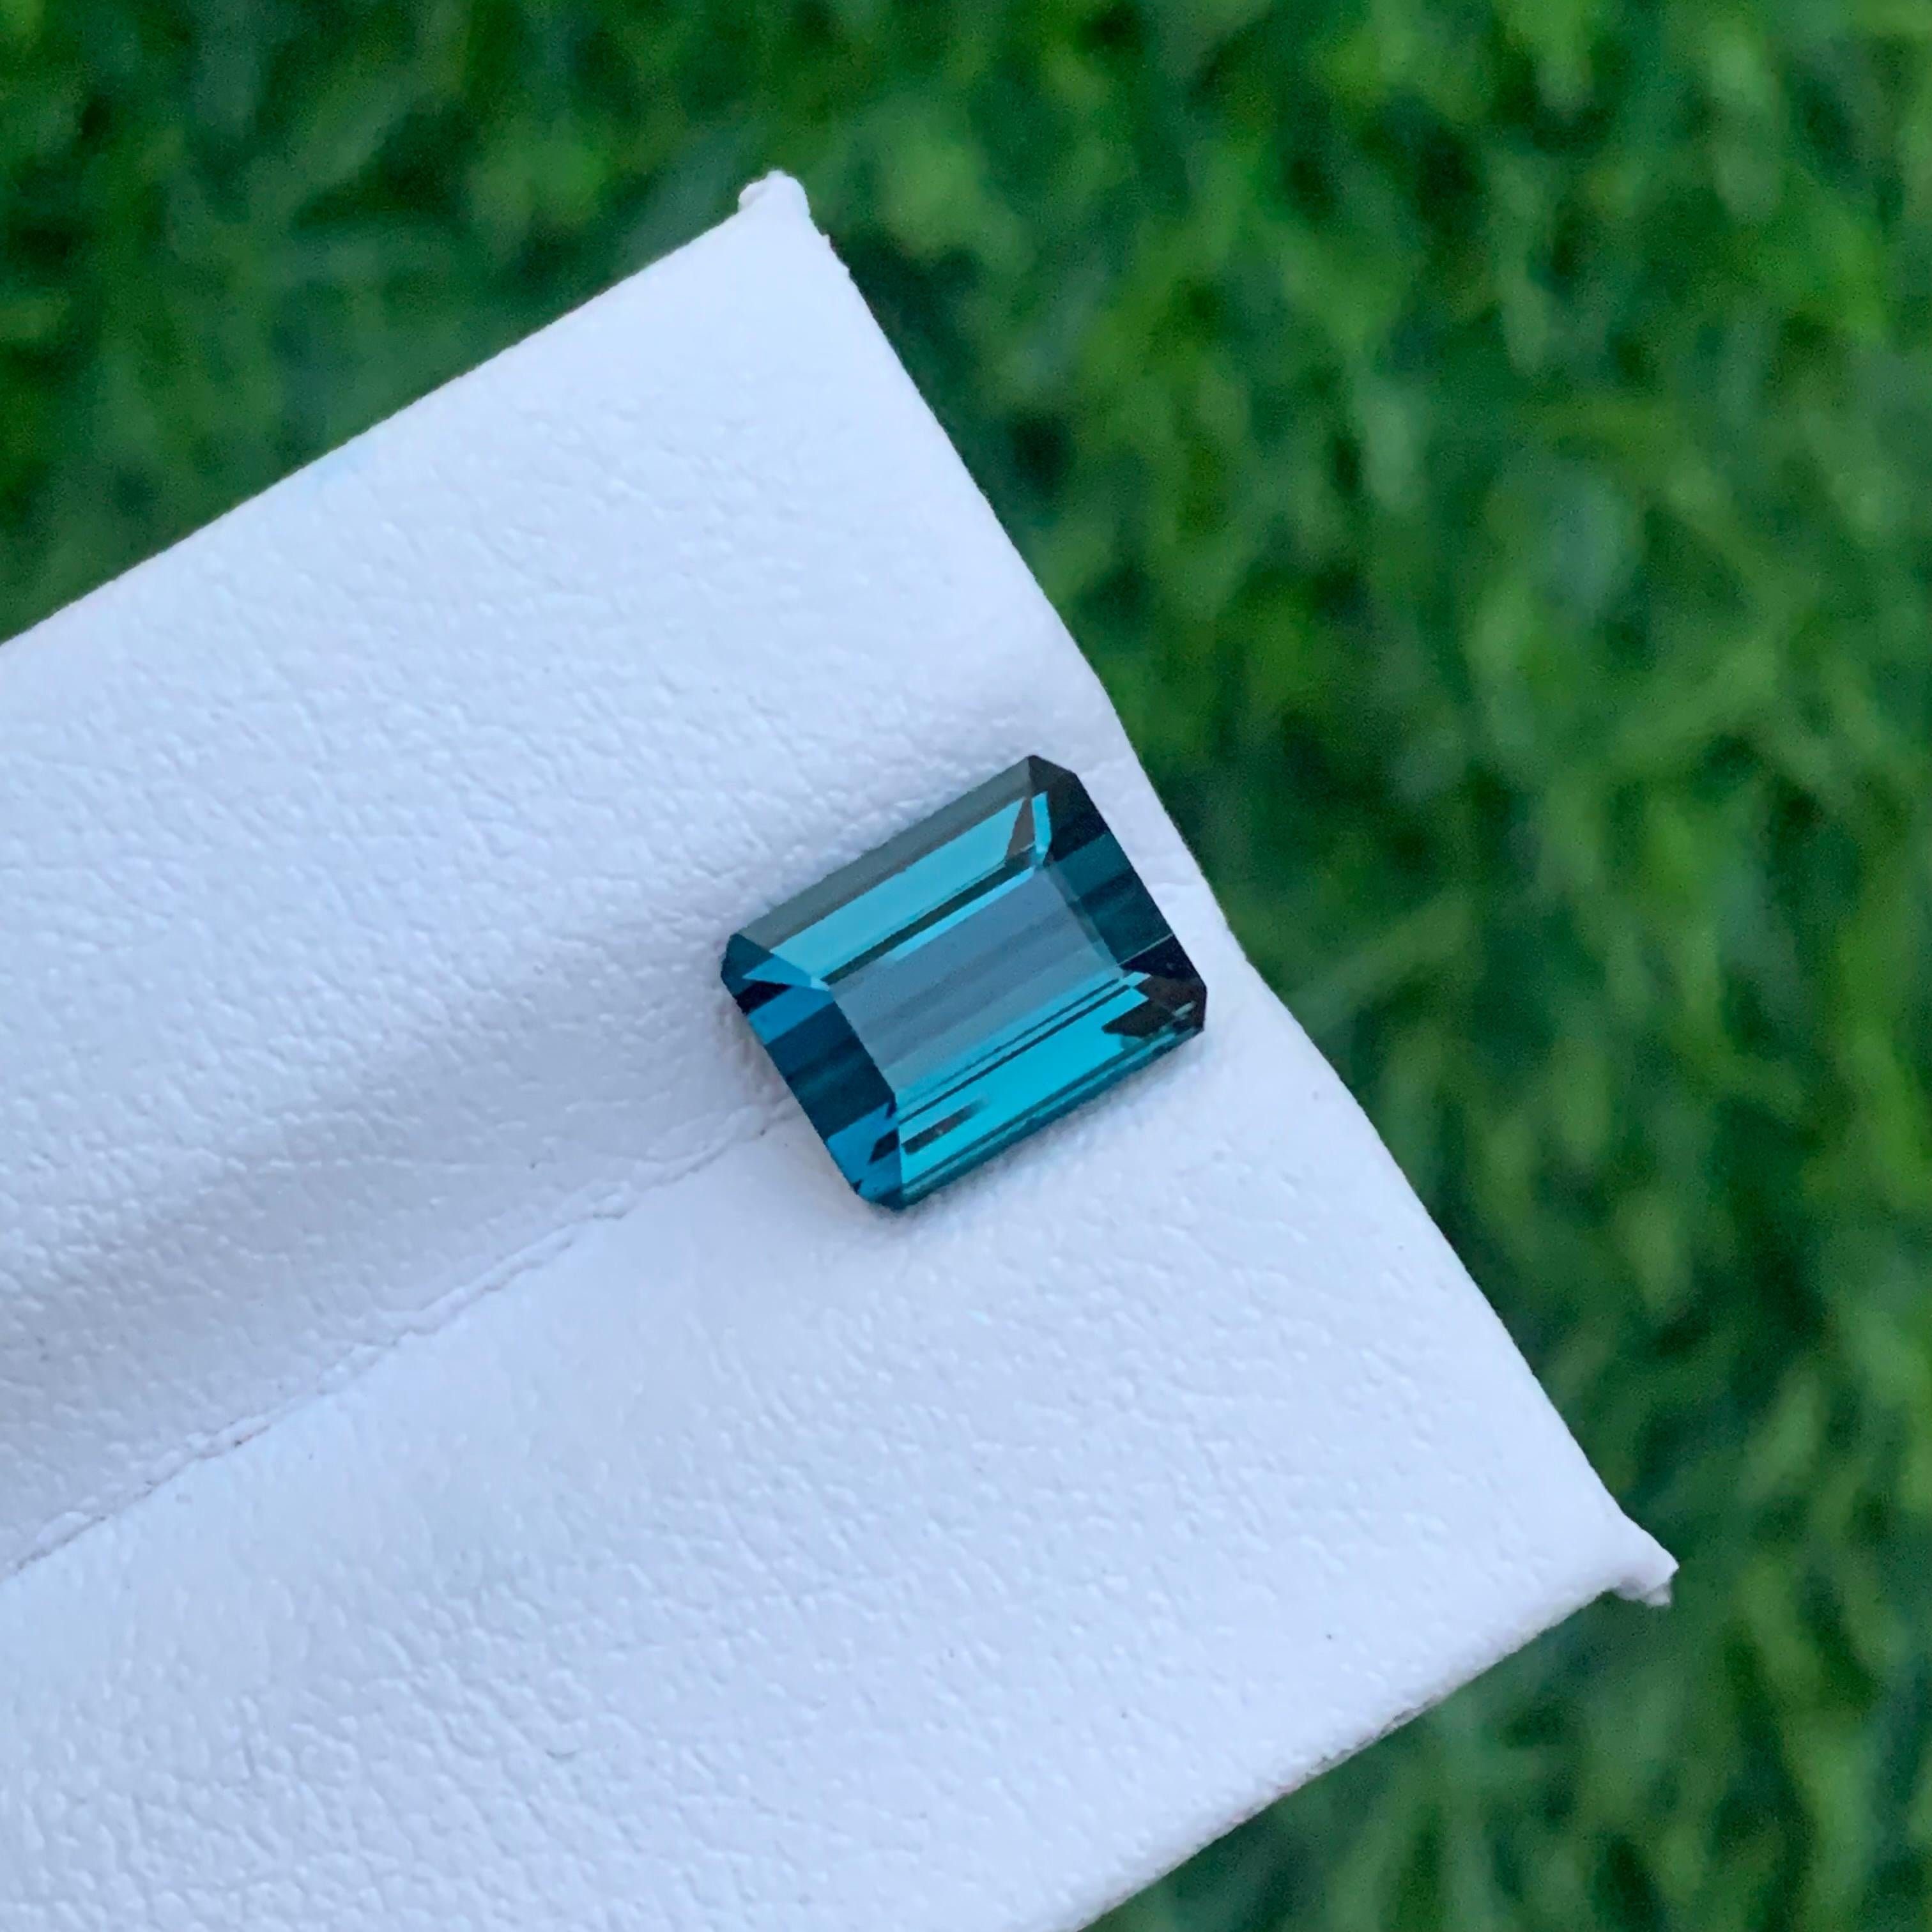 Gorgeous Loose Indicolite Tourmaline
Weight: 1.50 Carats
Dimension: 7.1x5.6x3.9 Mm
Origin; Kunar Afghanistan Mine
Color: Blue
Shape: Emerald
Treatment: Non
Certificate: On Demand
Indicolite tourmalines (tourmalines with blue in them) are rare.